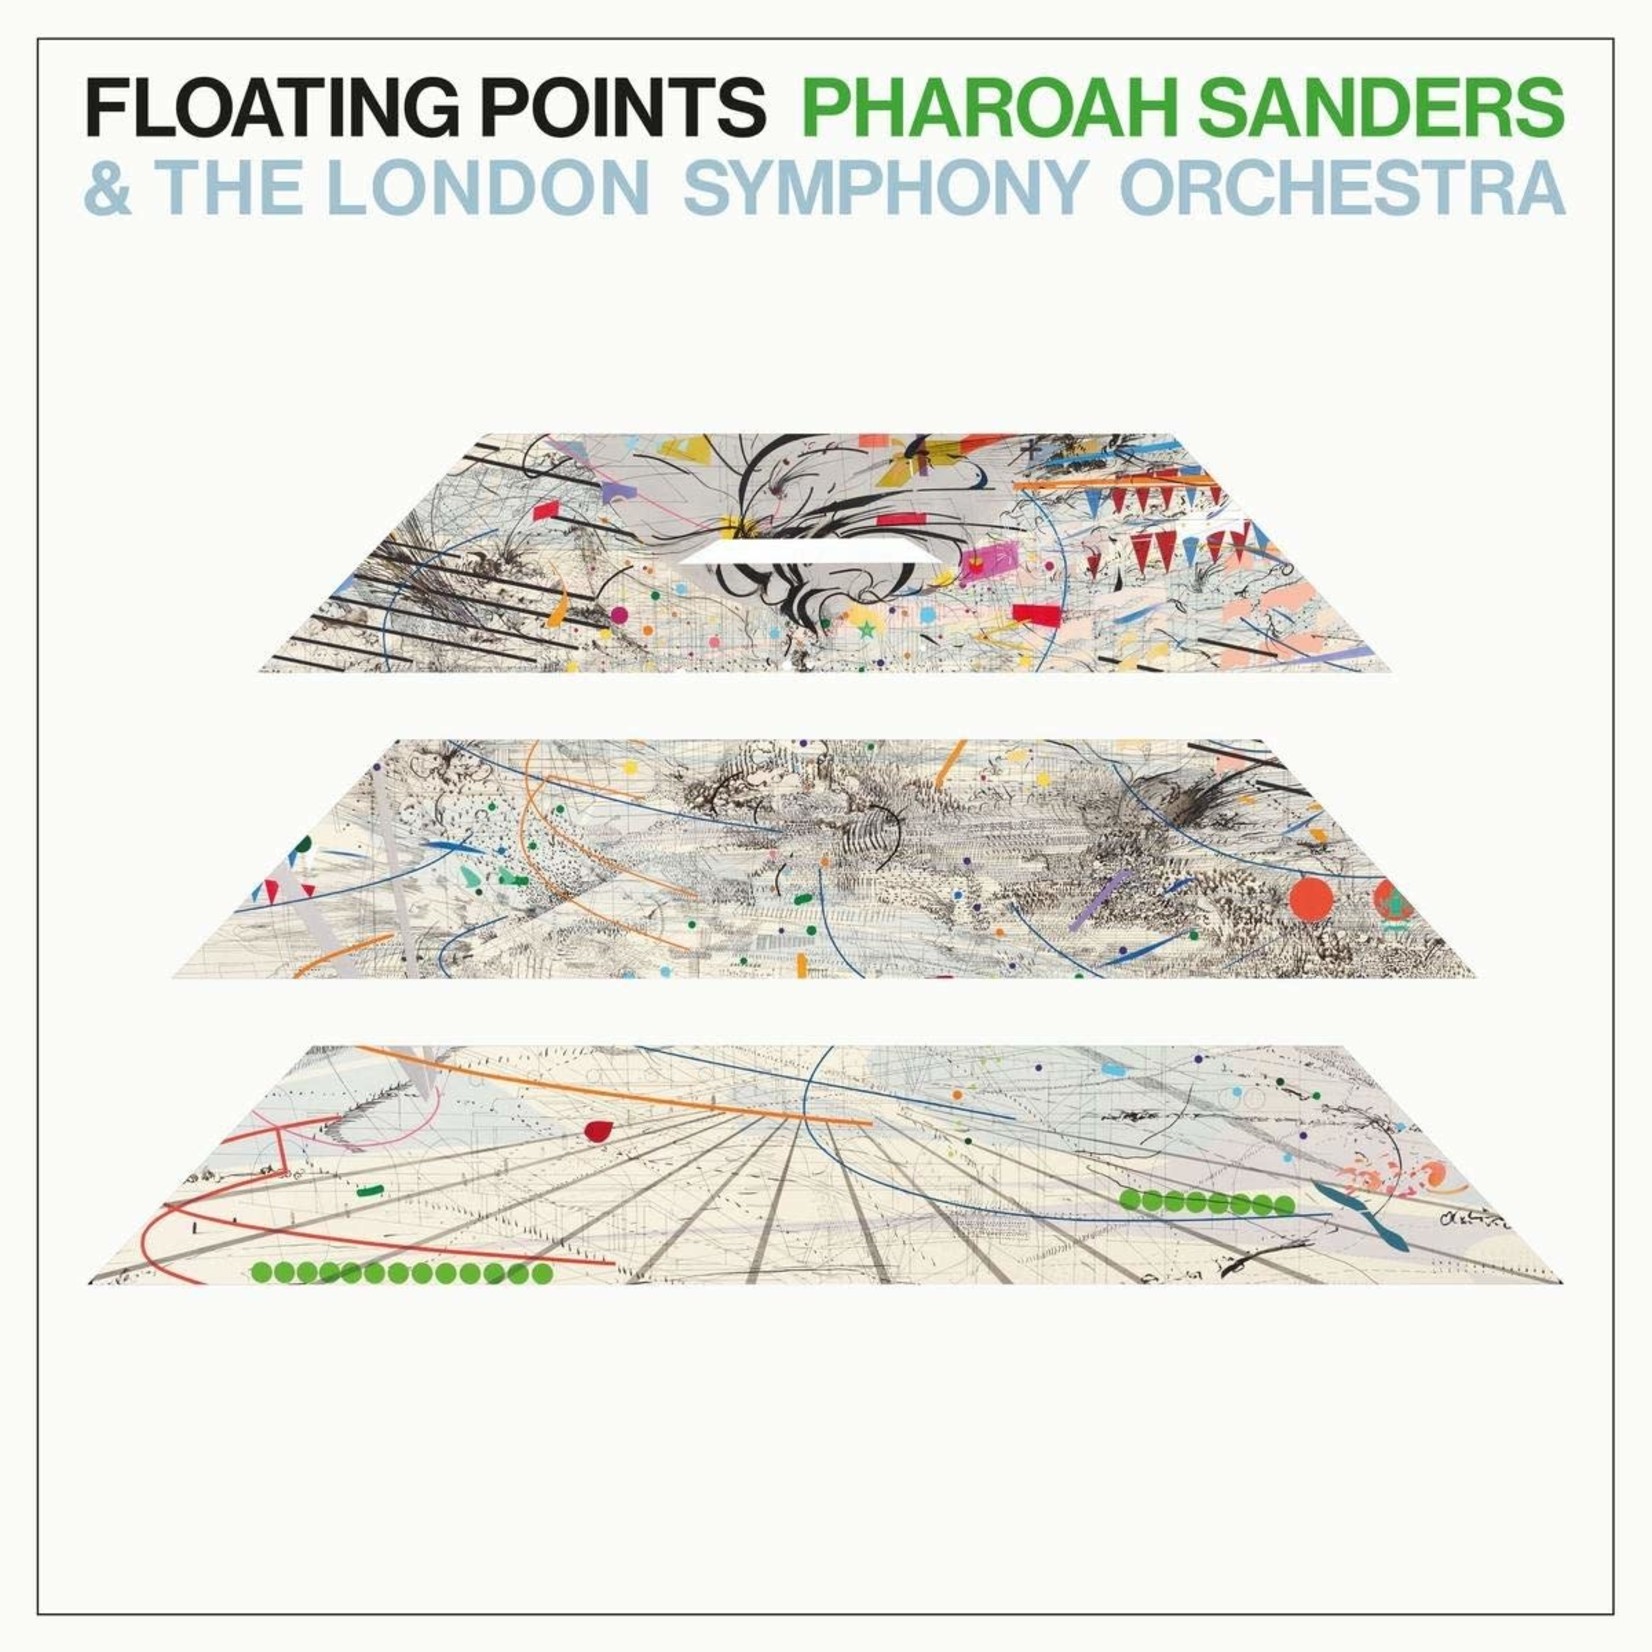 [New] Pharoah Sanders & the London Symphony Orchestra Floating Points - Promises